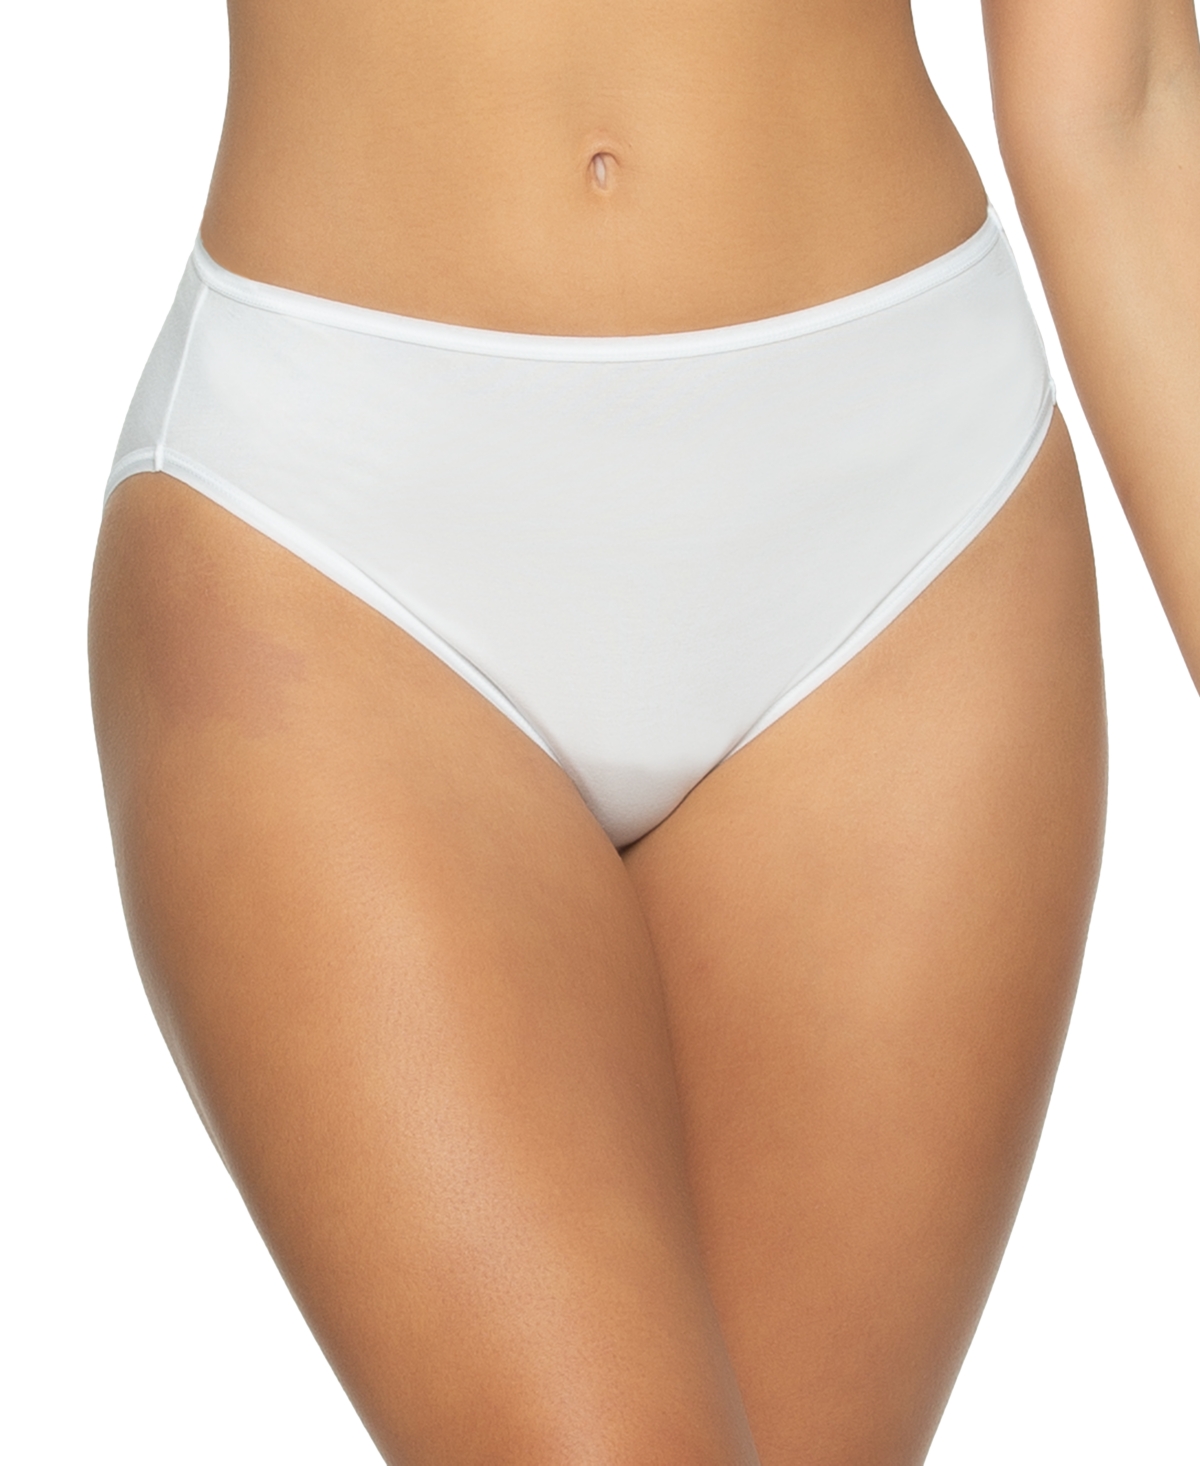 Paramour Women's 5-pk. High-leg Underwear 630180p5, Created For Macy's In Nvy,wht,al